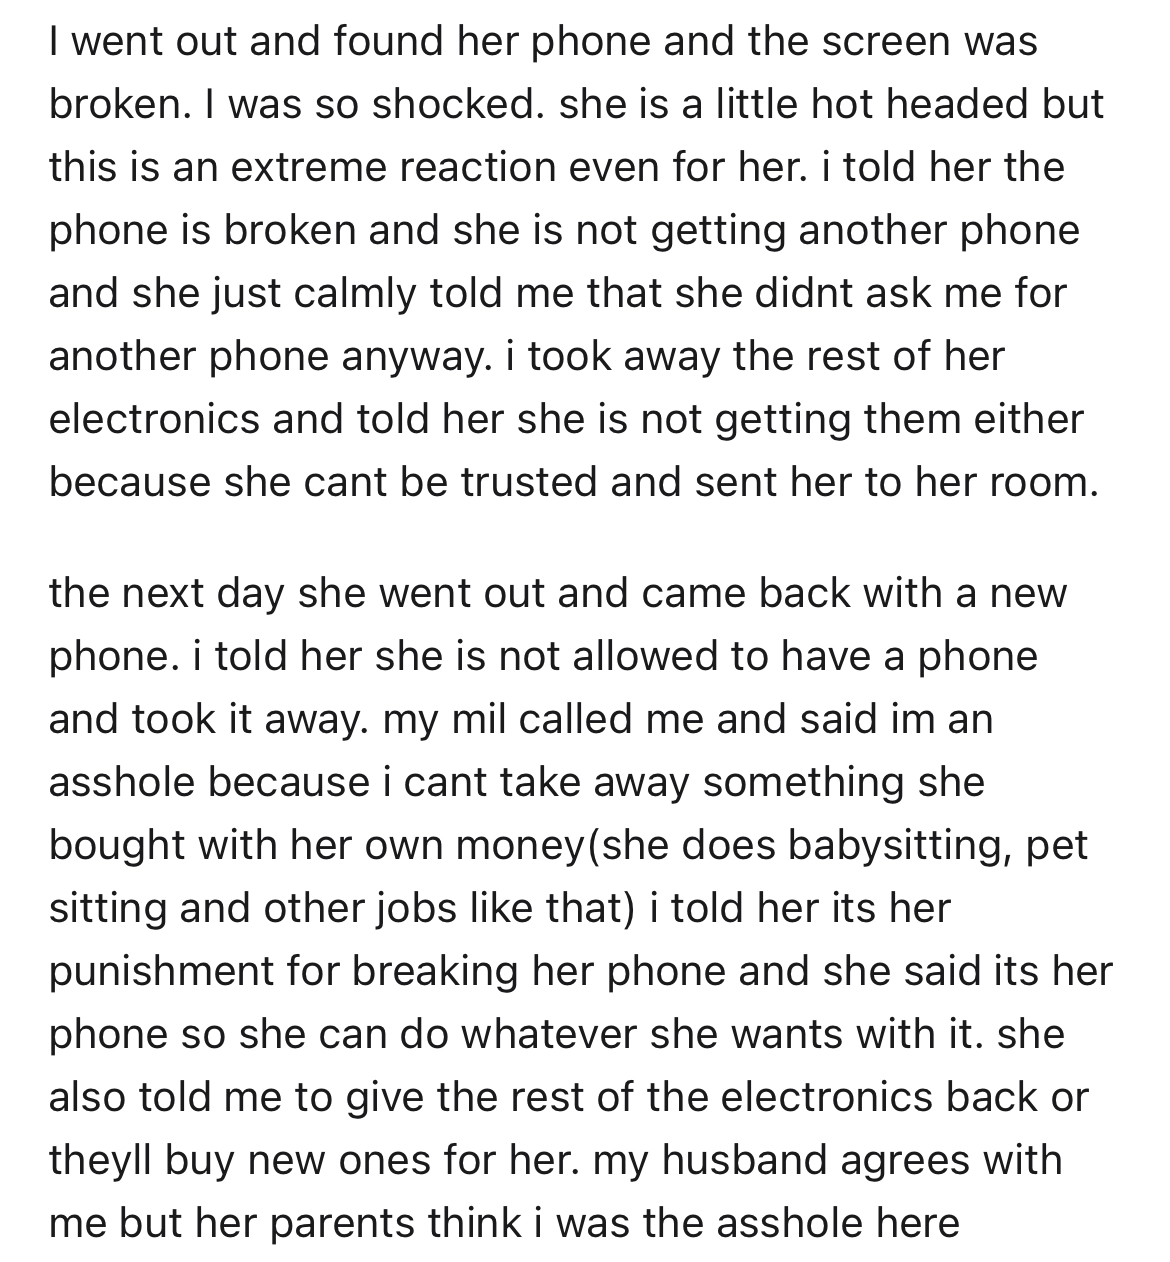 stepmom takes step-daughter's phone away - document - I went out and found her phone and the screen was broken. I was so shocked. she is a little hot headed but this is an extreme reaction even for her. i told her the phone is broken and she is not gettin